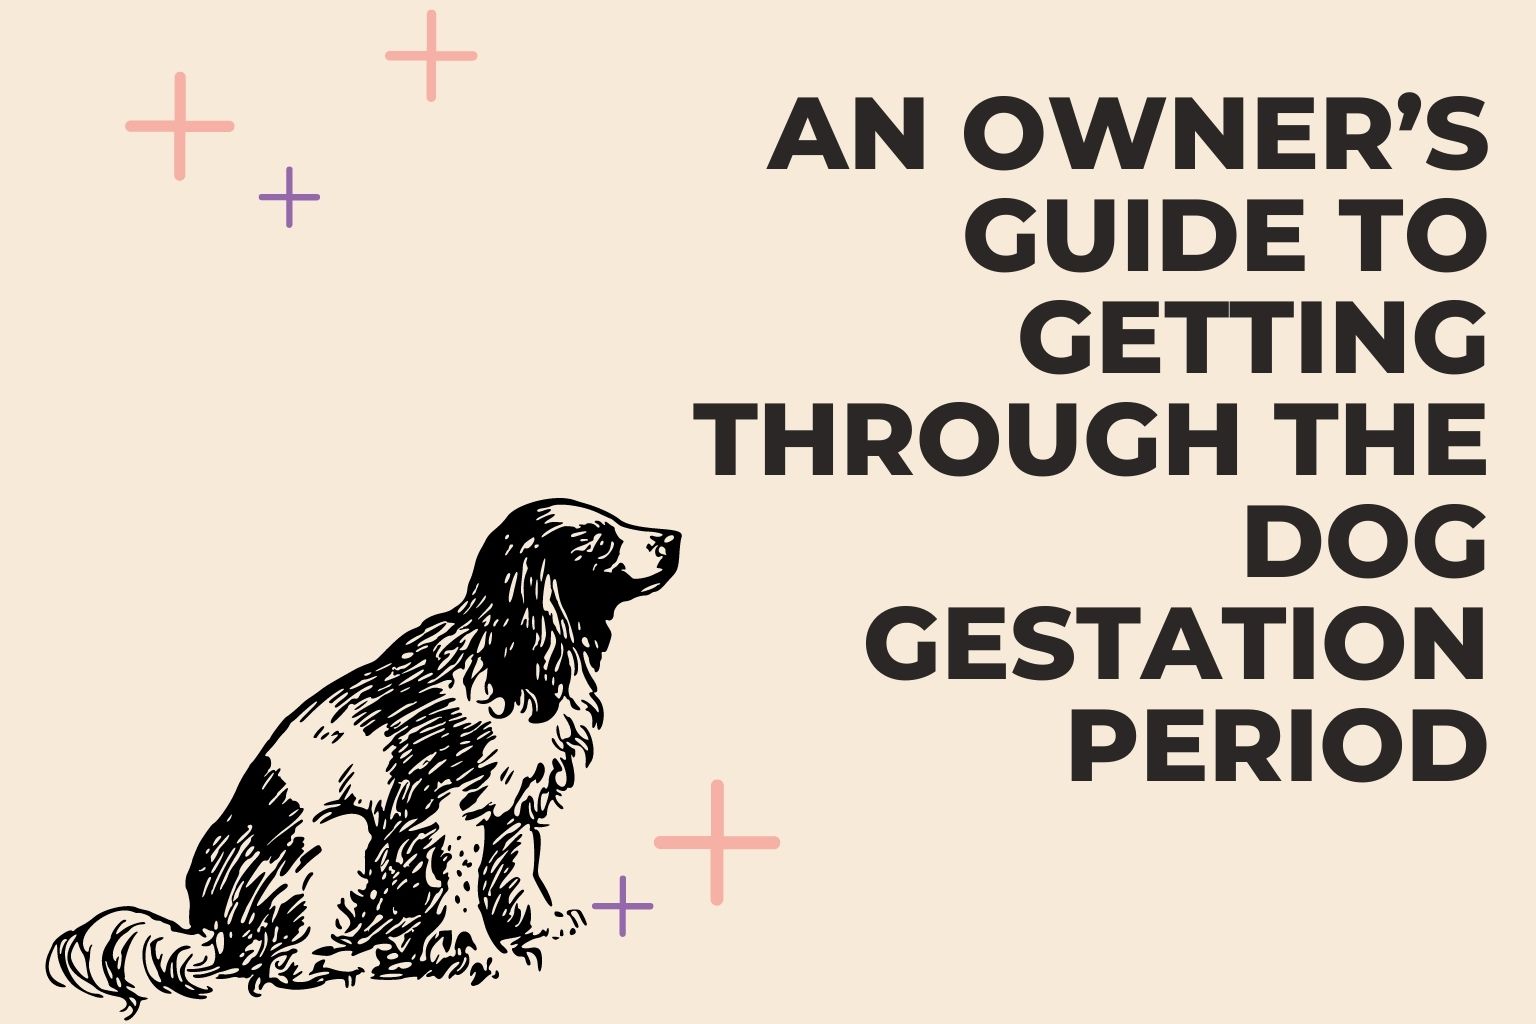 An Owner’s Guide to Getting Through the Dog Gestation Period